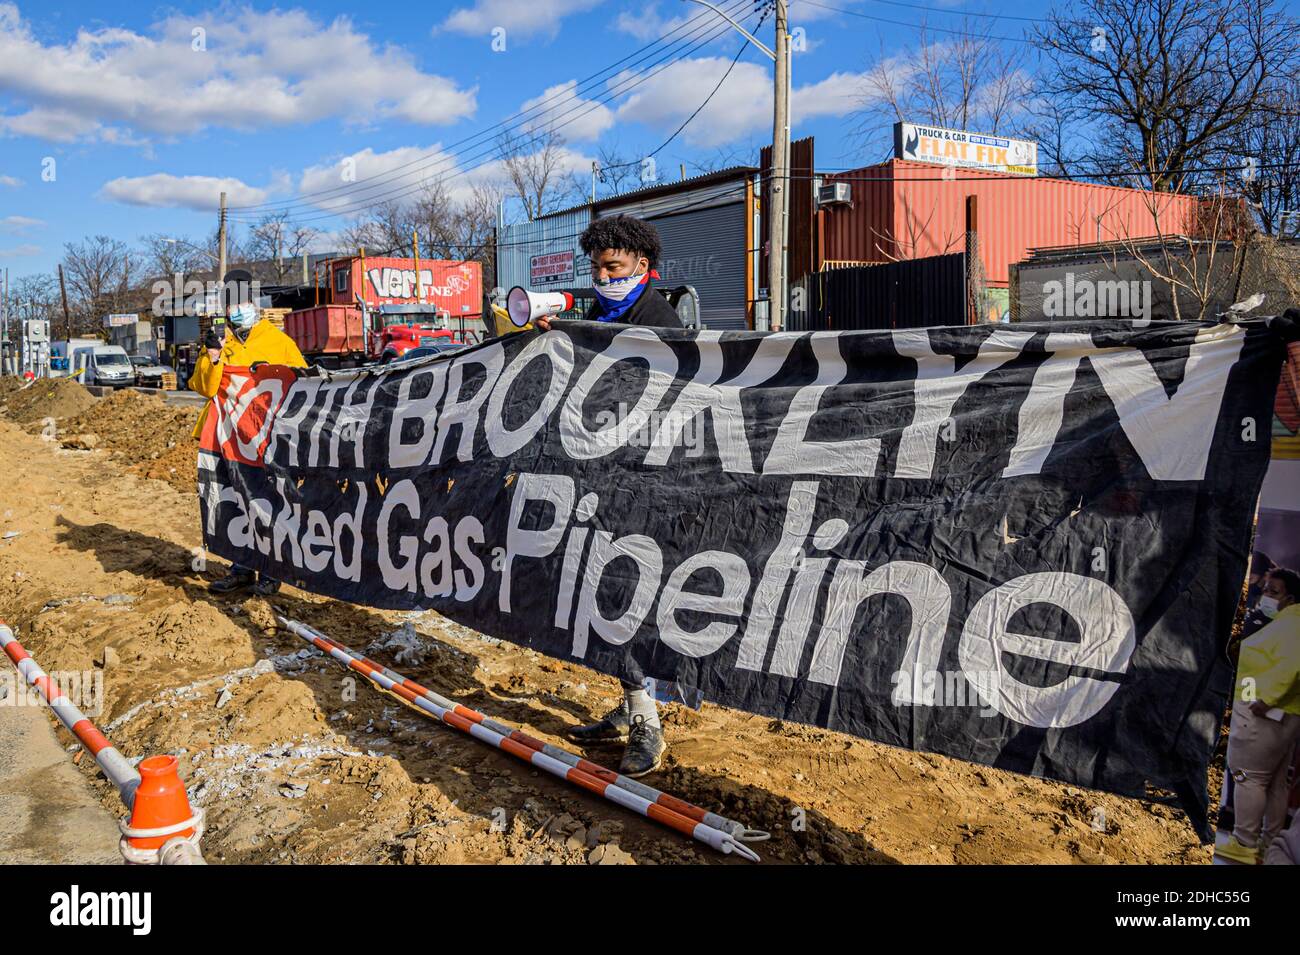 Brooklyn, New York, USA. 10th Dec, 2020. Residents from Brownsville, Brooklyn, disrupted National Grid's construction site on December 10, 2020 at the intersection of Junius St. and Linden Boulevard halting their so-called Metropolitan Reliability Infrastructure Project, better known as the North Brooklyn Pipeline, successfully shutting it down for the day. (Photo by Erik McGregor/Sipa USA) Credit: Sipa USA/Alamy Live News Stock Photo